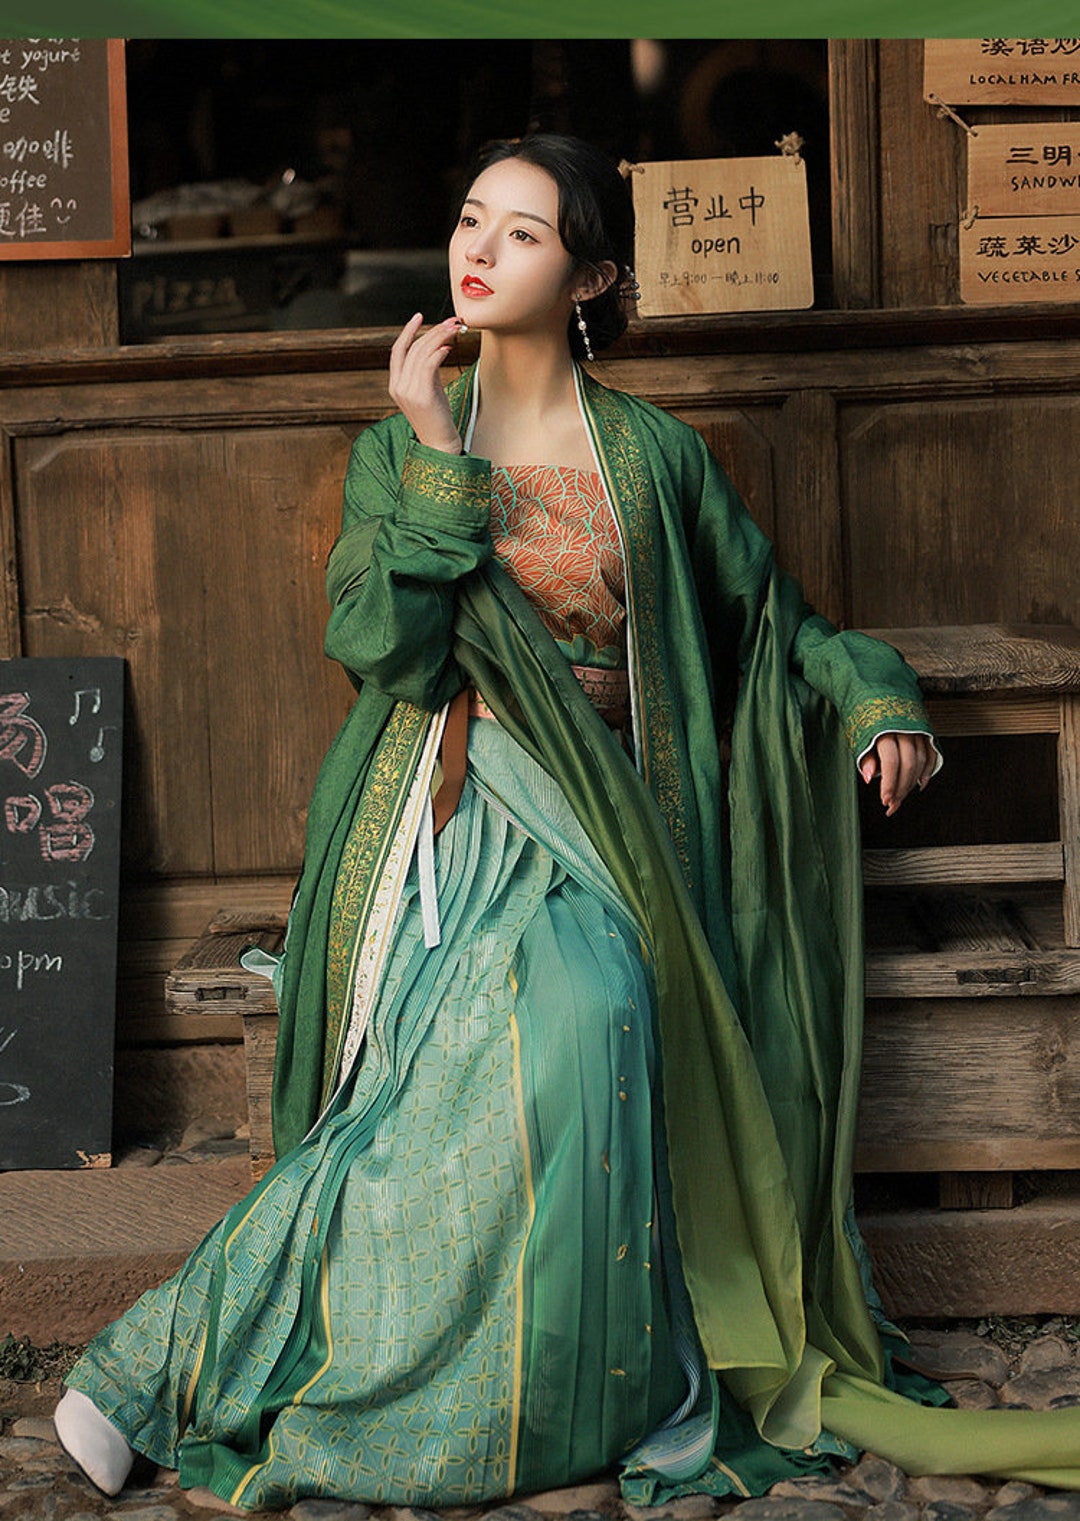 Green Song Dynasty Female Historical Clothing, Chinese Traditional ...